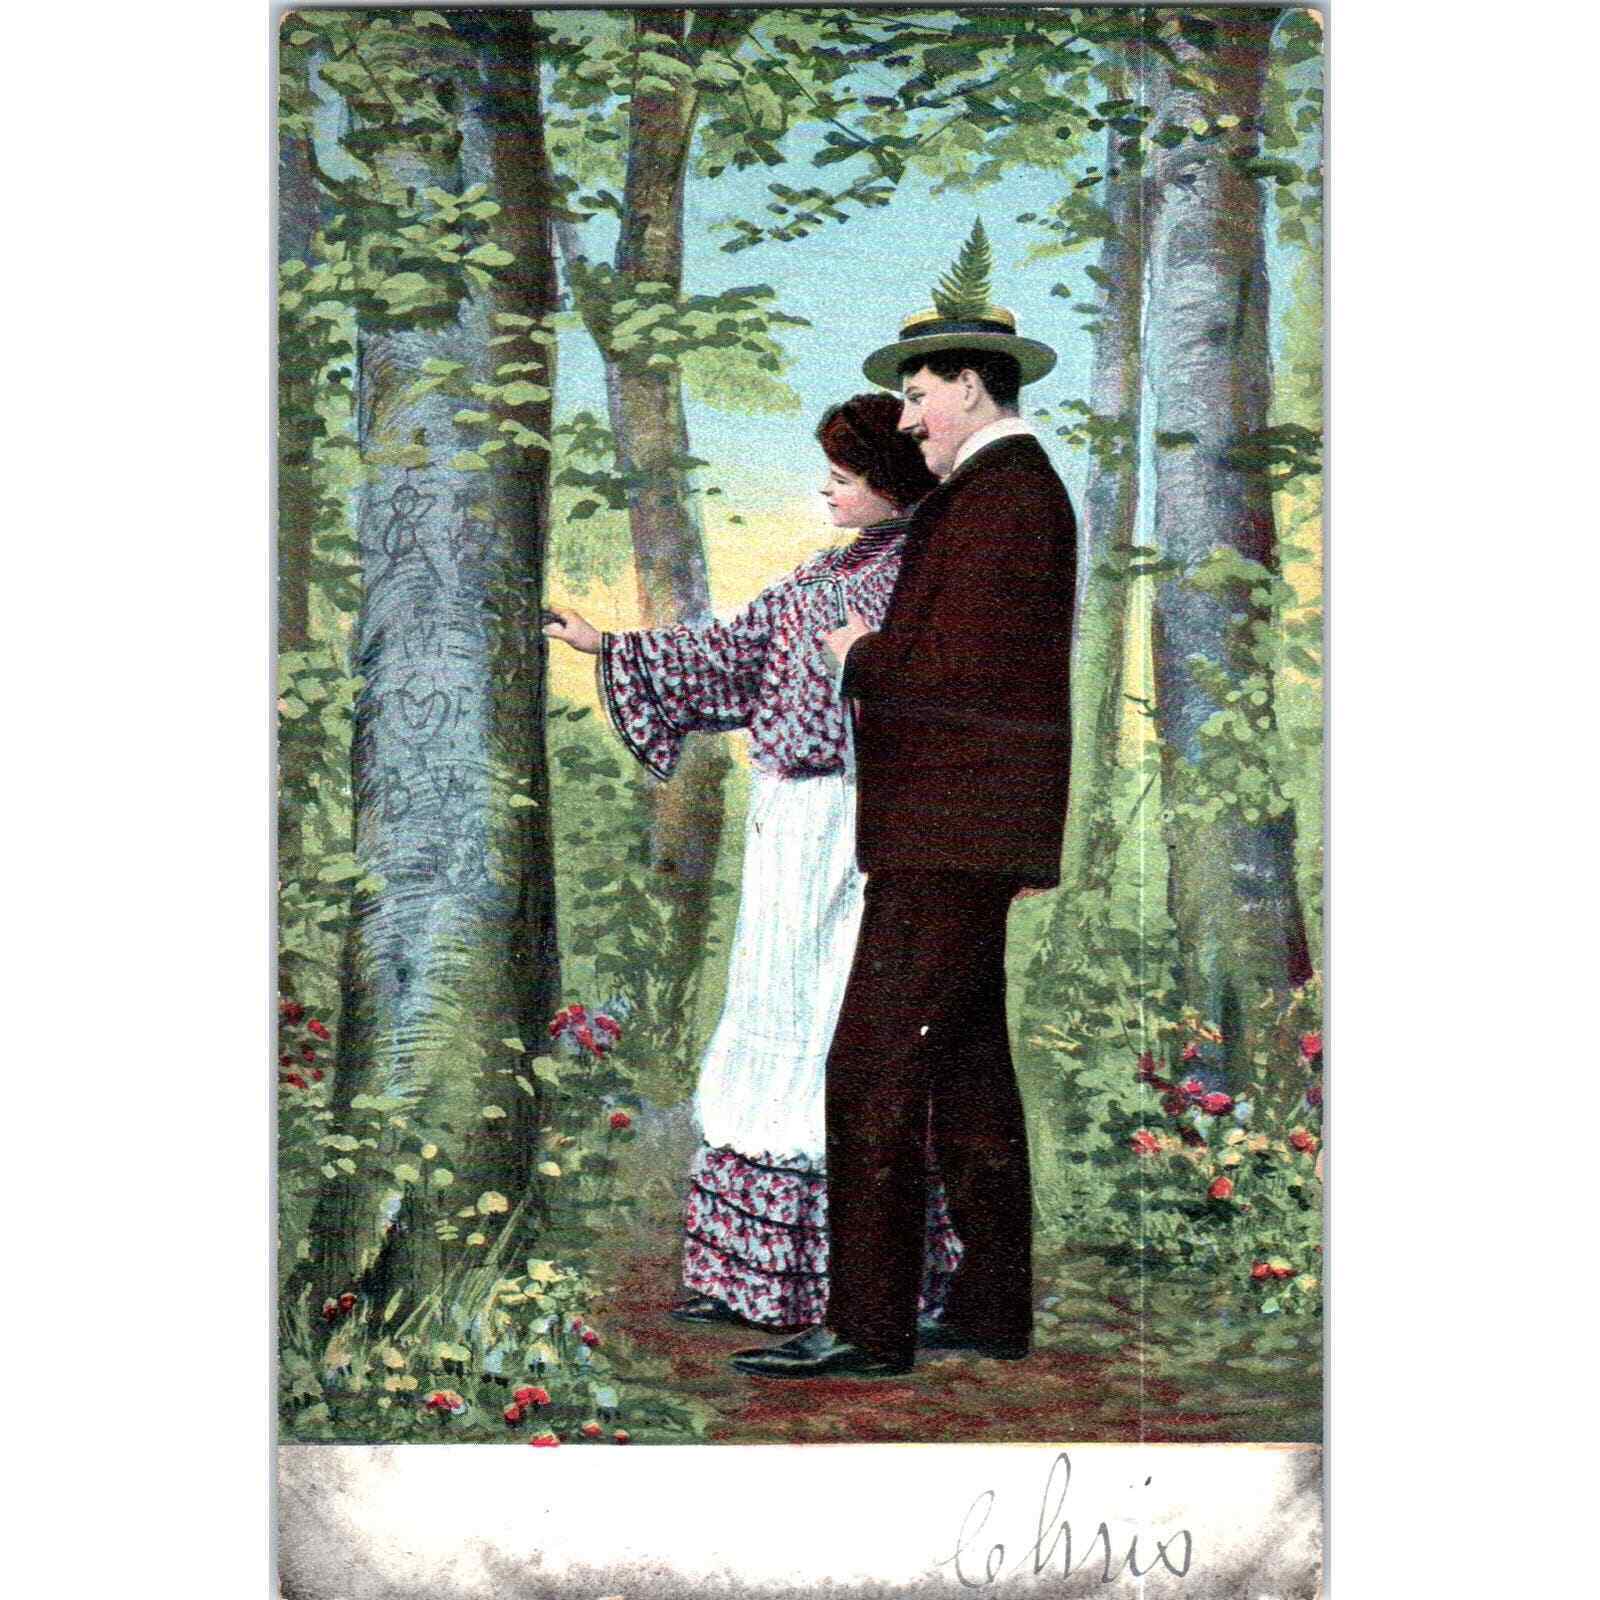 Courting Couple In a Forest Romance 1906 Victorian Original Postcard TK1-P18